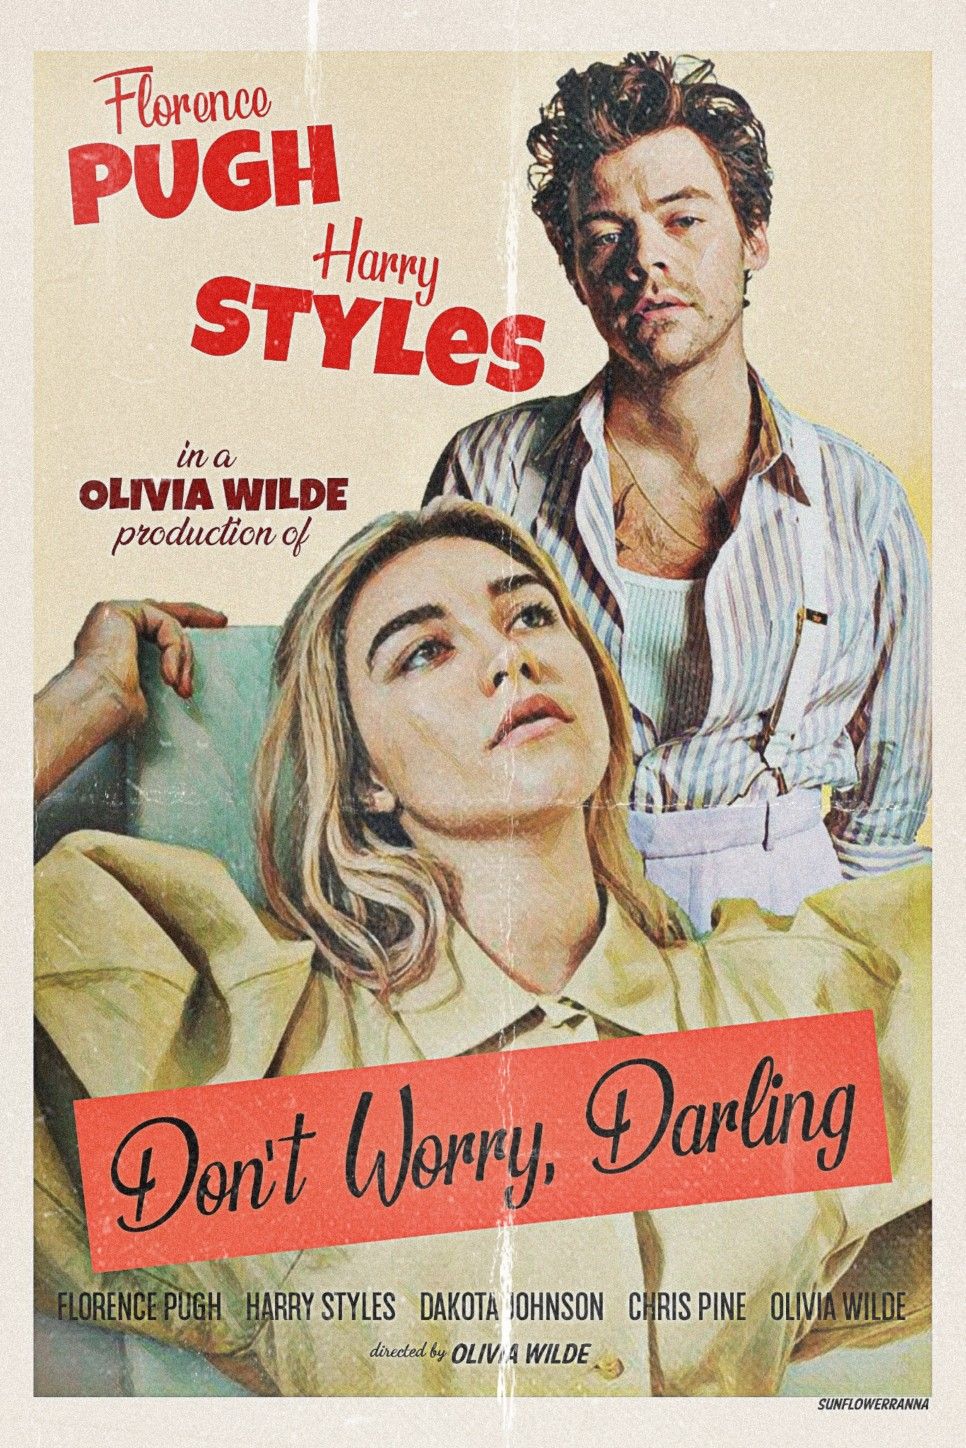 Harry Styles Florence Pugh Don't Worry Darling Movie Poster. Harry styles poster, Harry styles wallpaper, Darling movie